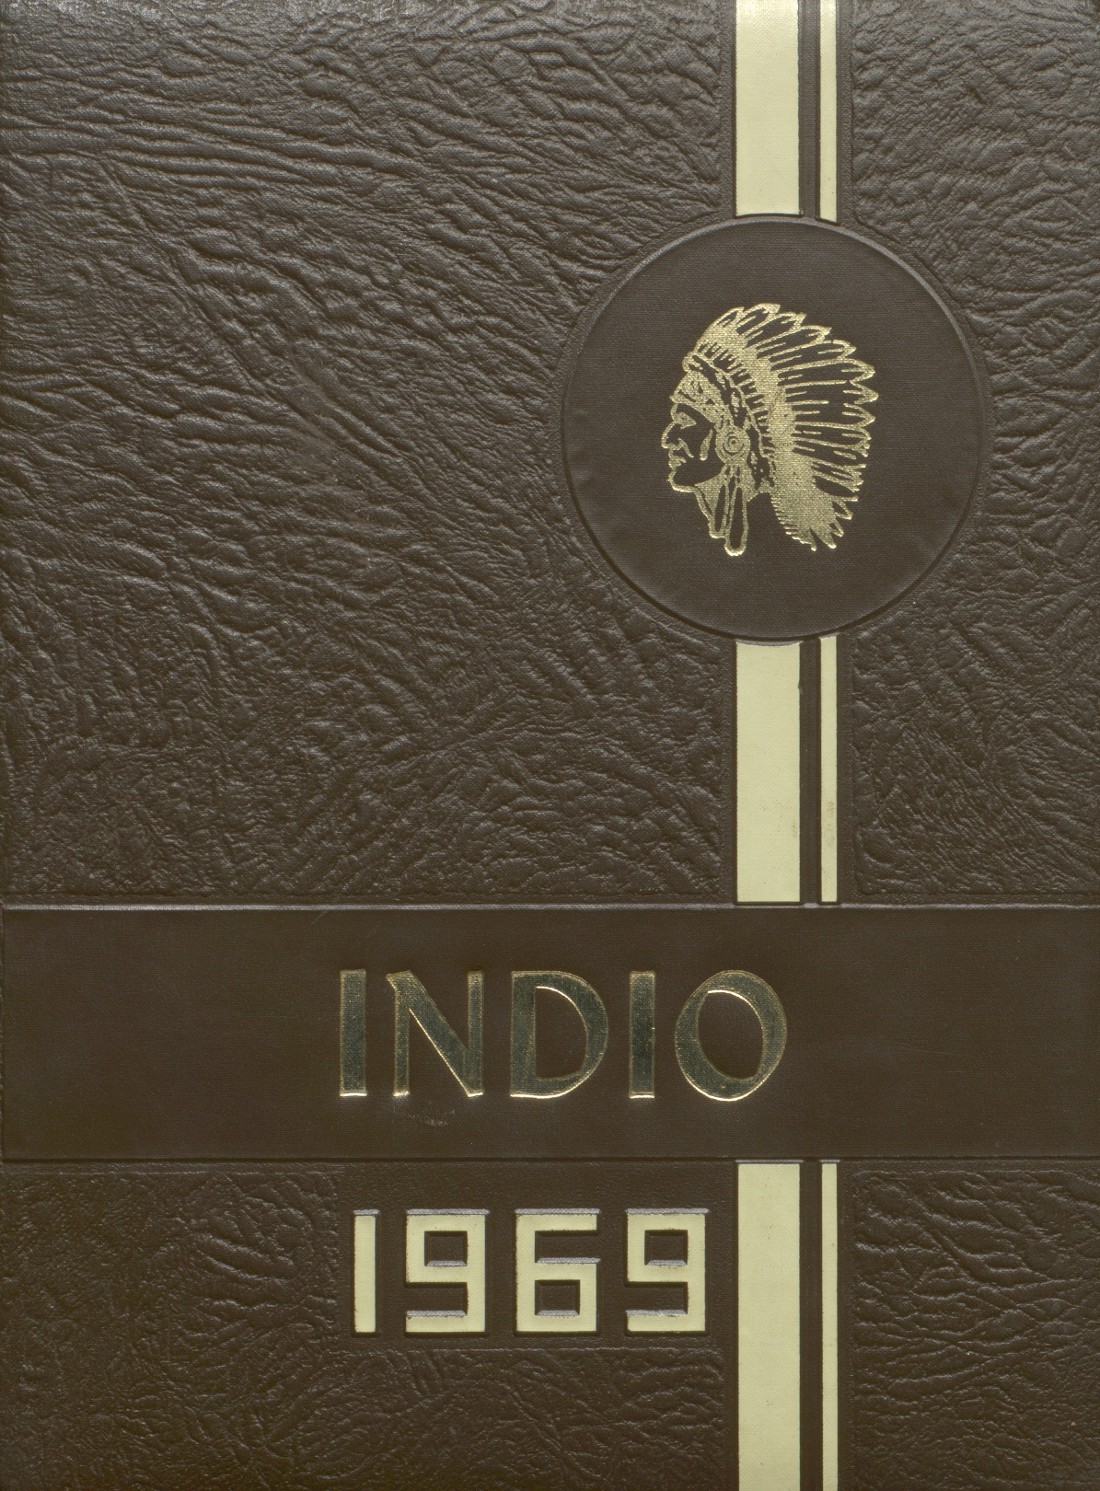 1969 yearbook from Circleville High School from Circleville, West